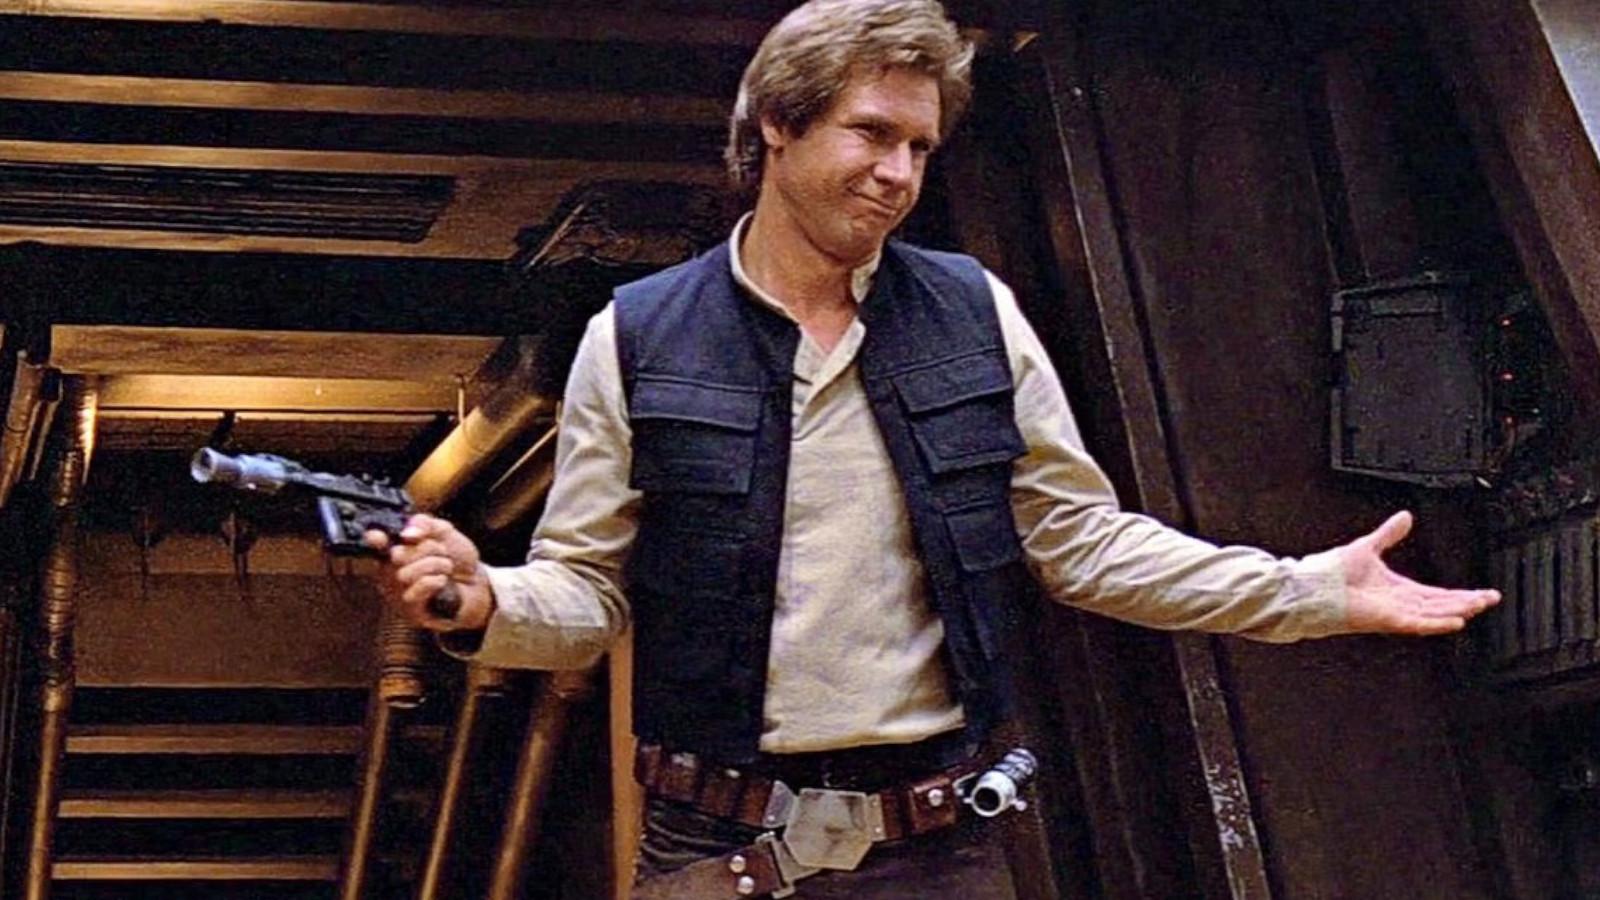 Harrison Ford as Han Solo in Return of the Jedi